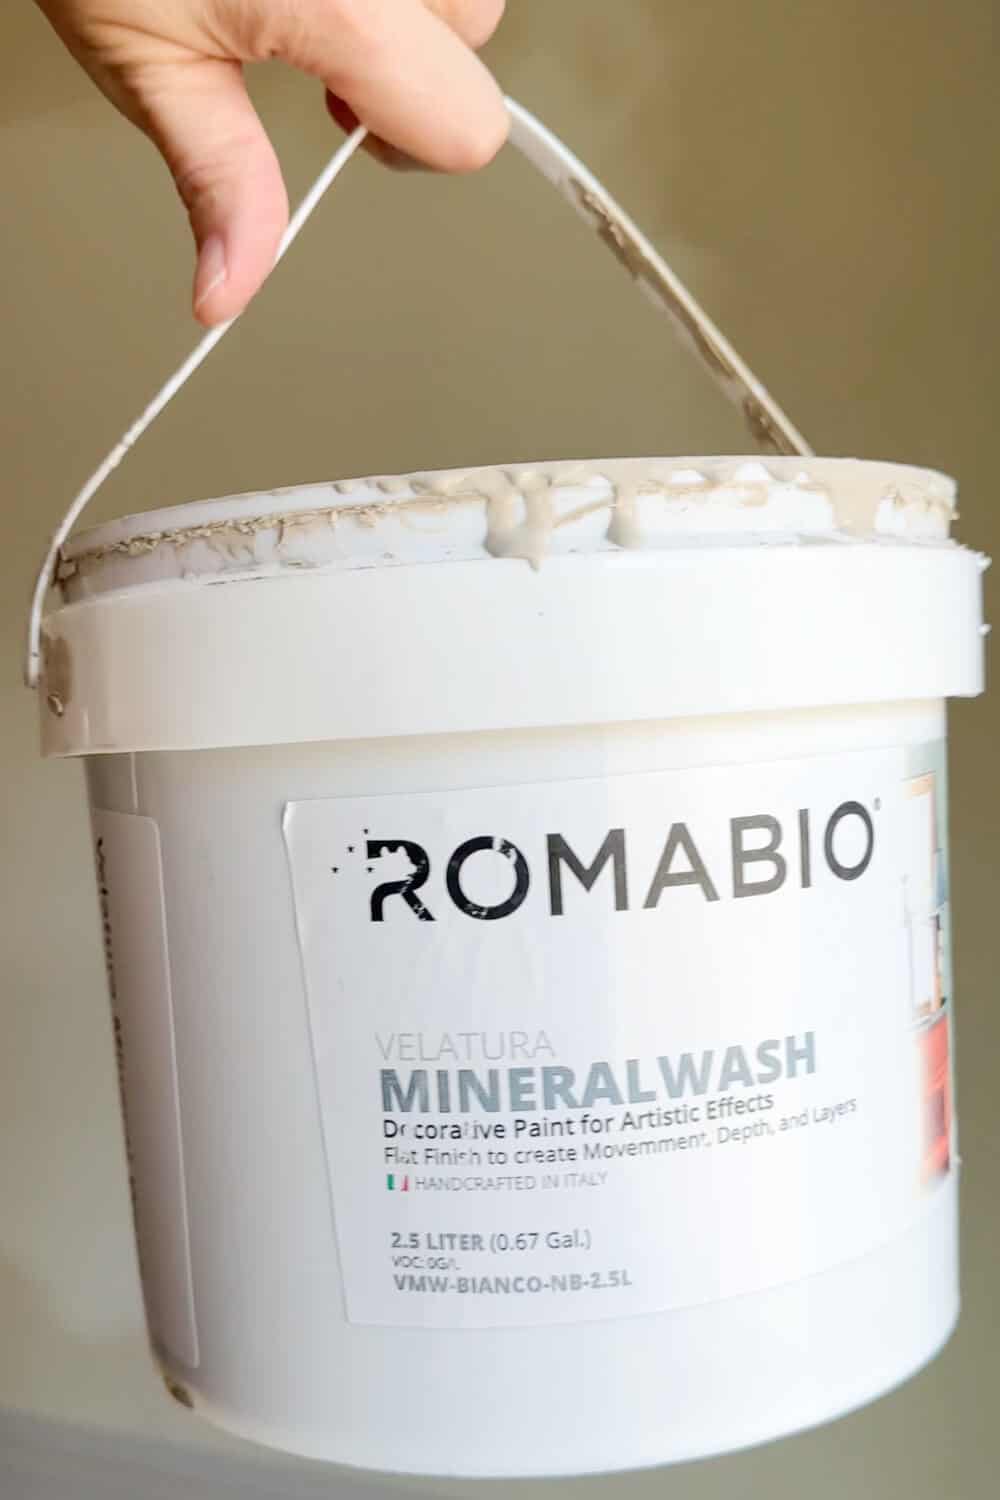 Open bucket of Romabio Velatura Mineralwash held in front of a limewashed wall